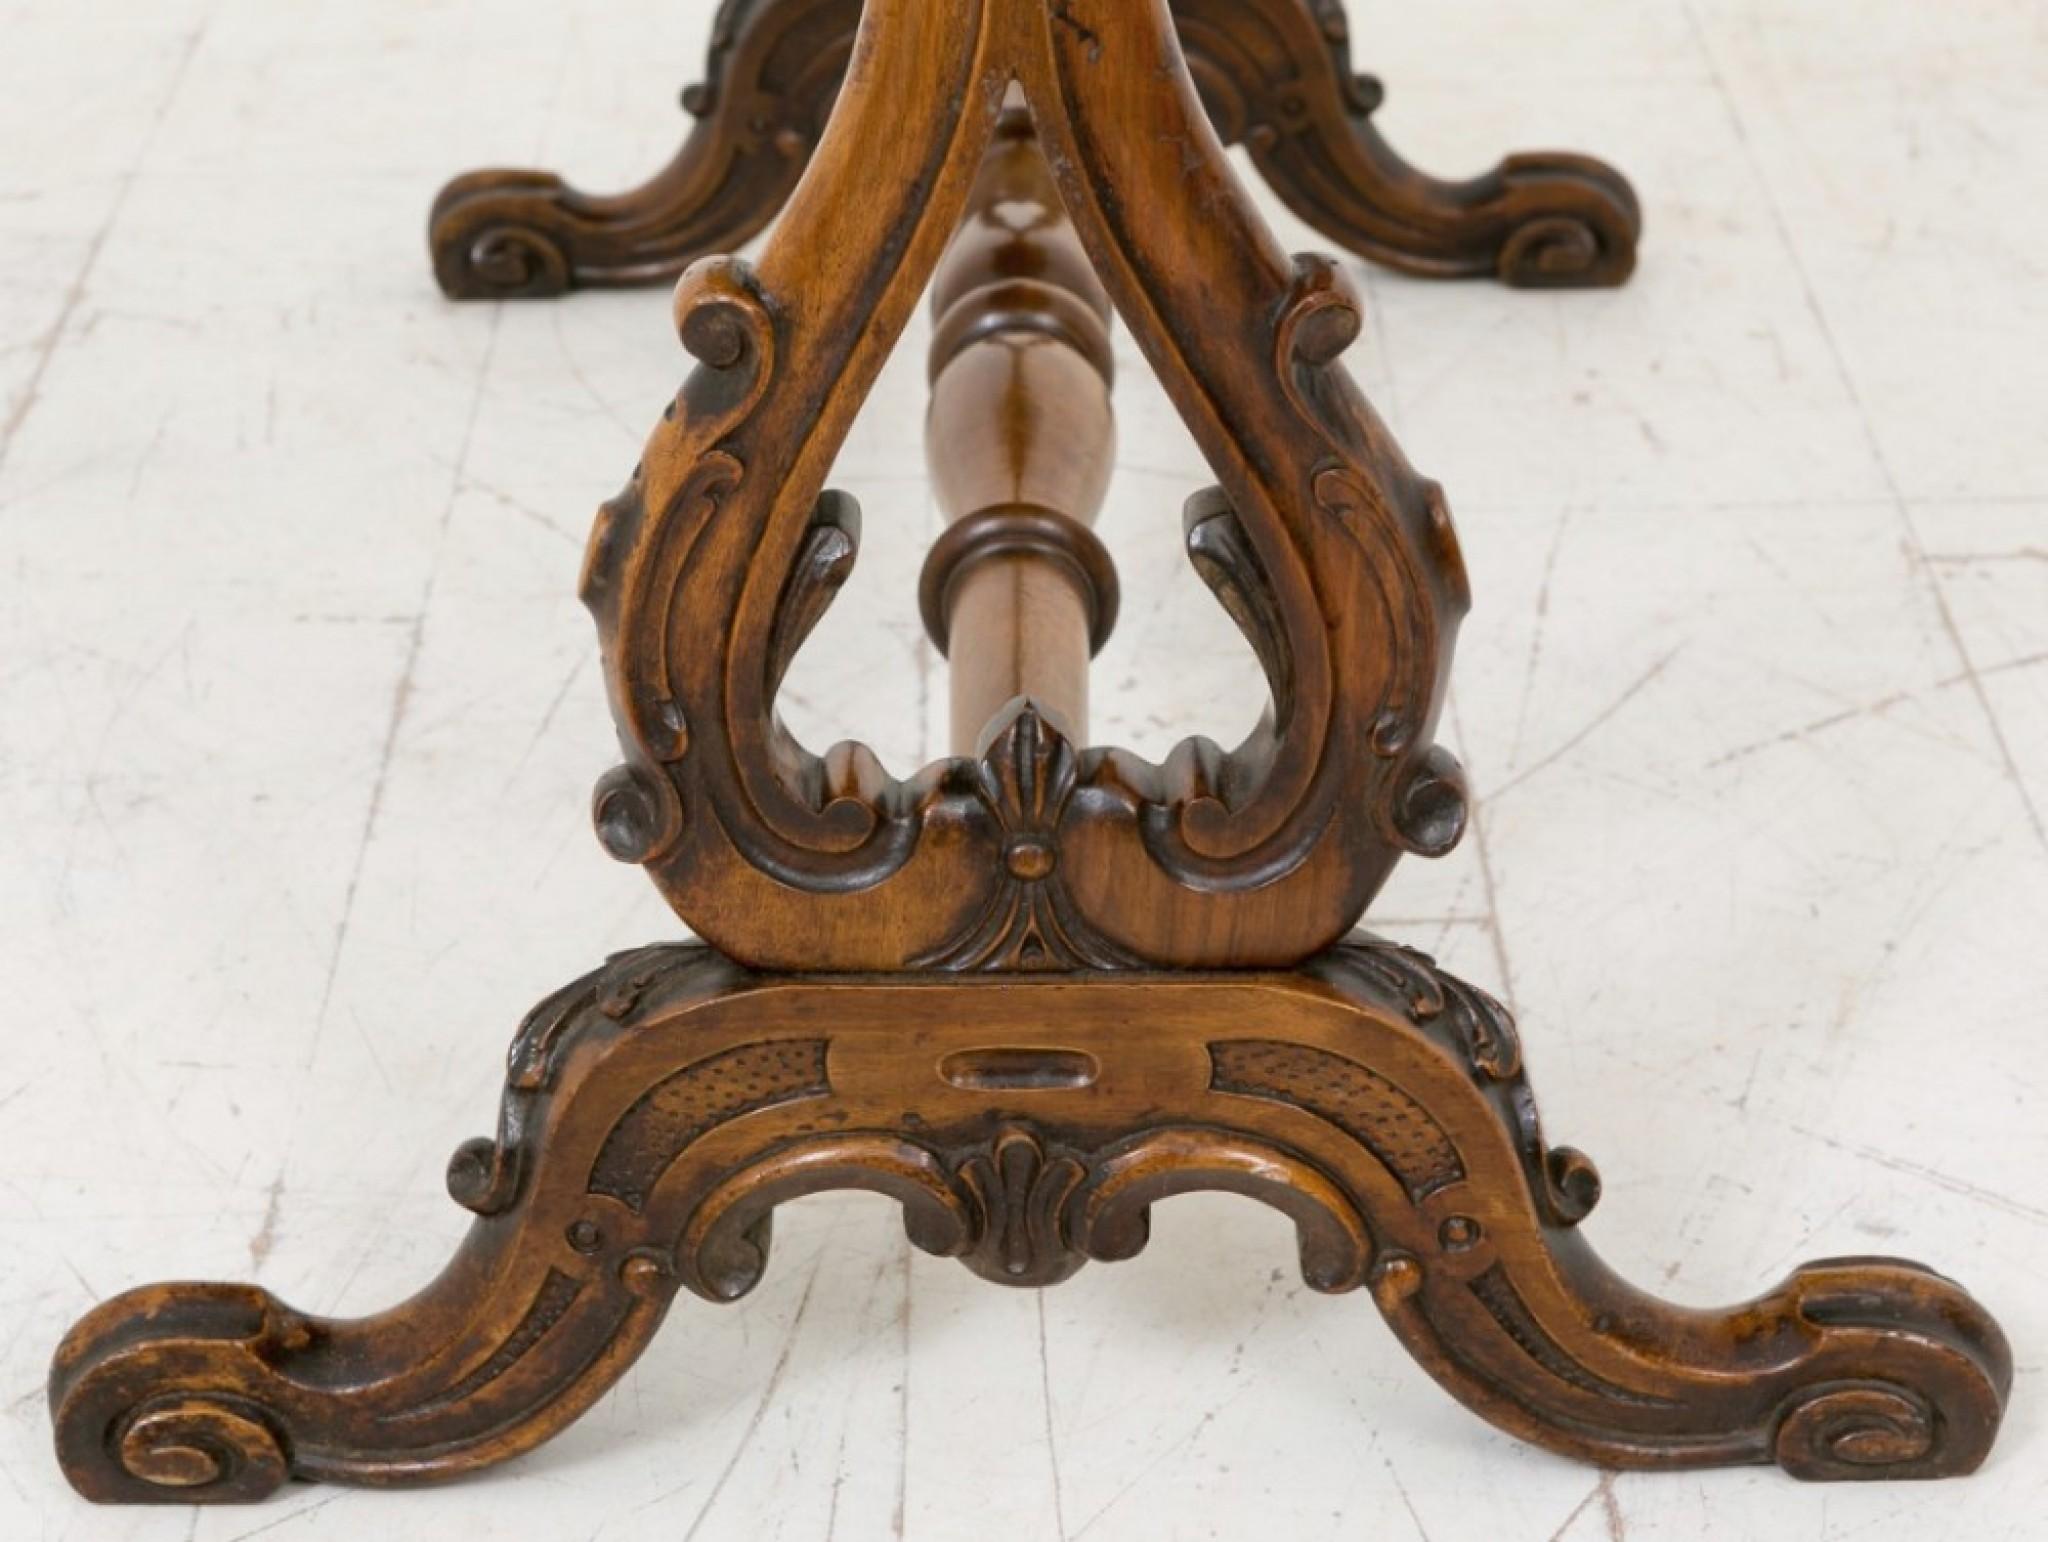 A superior quality Victorian Walnut Stretcher table, standing on swept feet with carved knees and toes.
circa 1860
The Lyre shaped supports featuring carvings and the serpentine top having quartered Burr Walnut veneers.
A very pretty table.